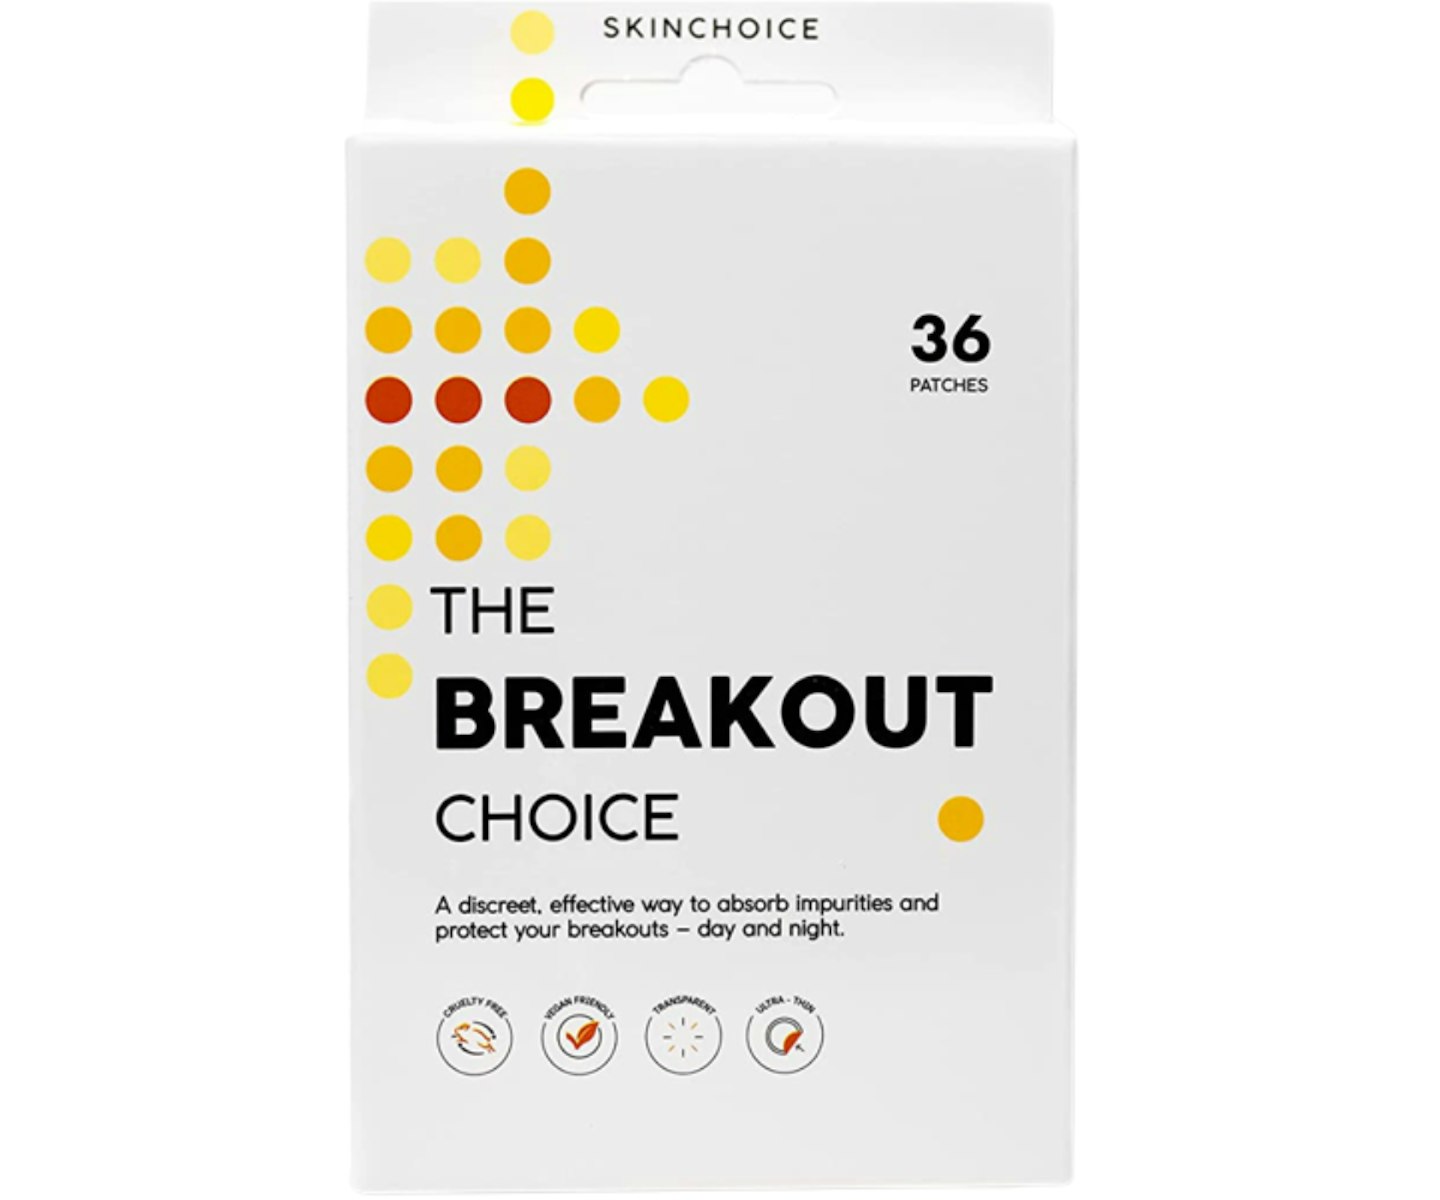 A picture of the Skinchoice The Breakout Choice.